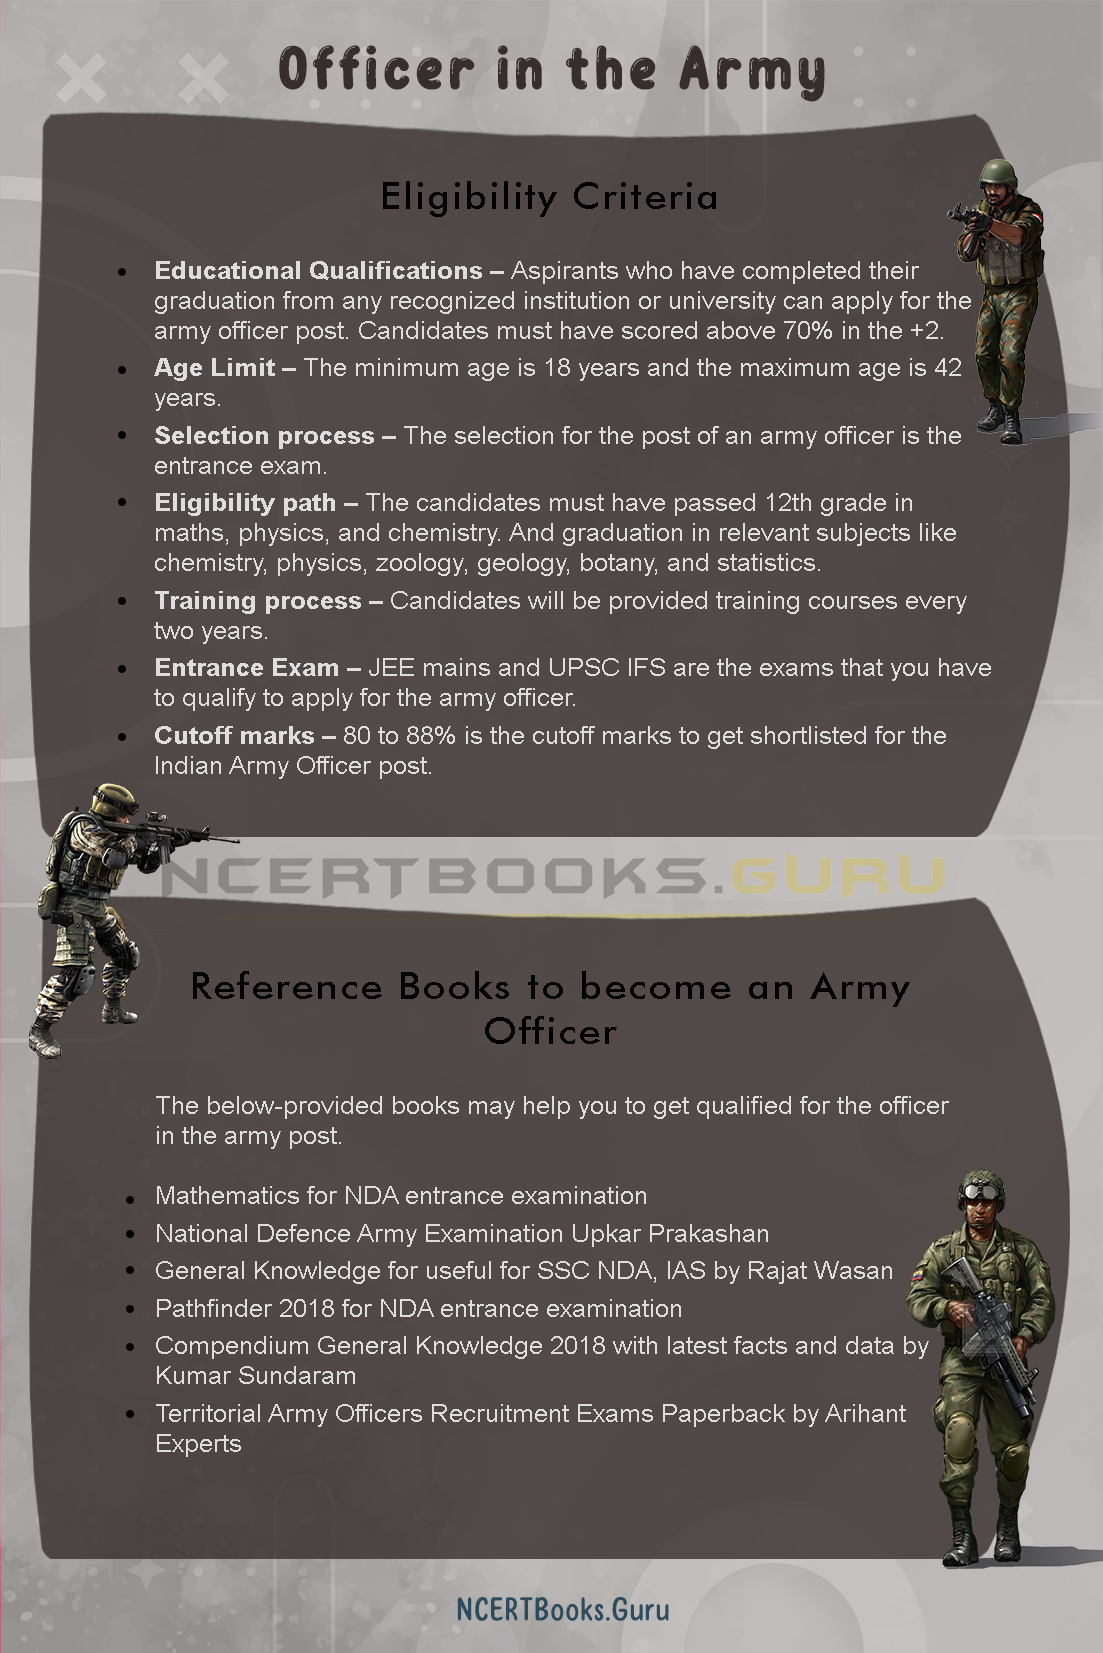 How to become an Officer in the Army